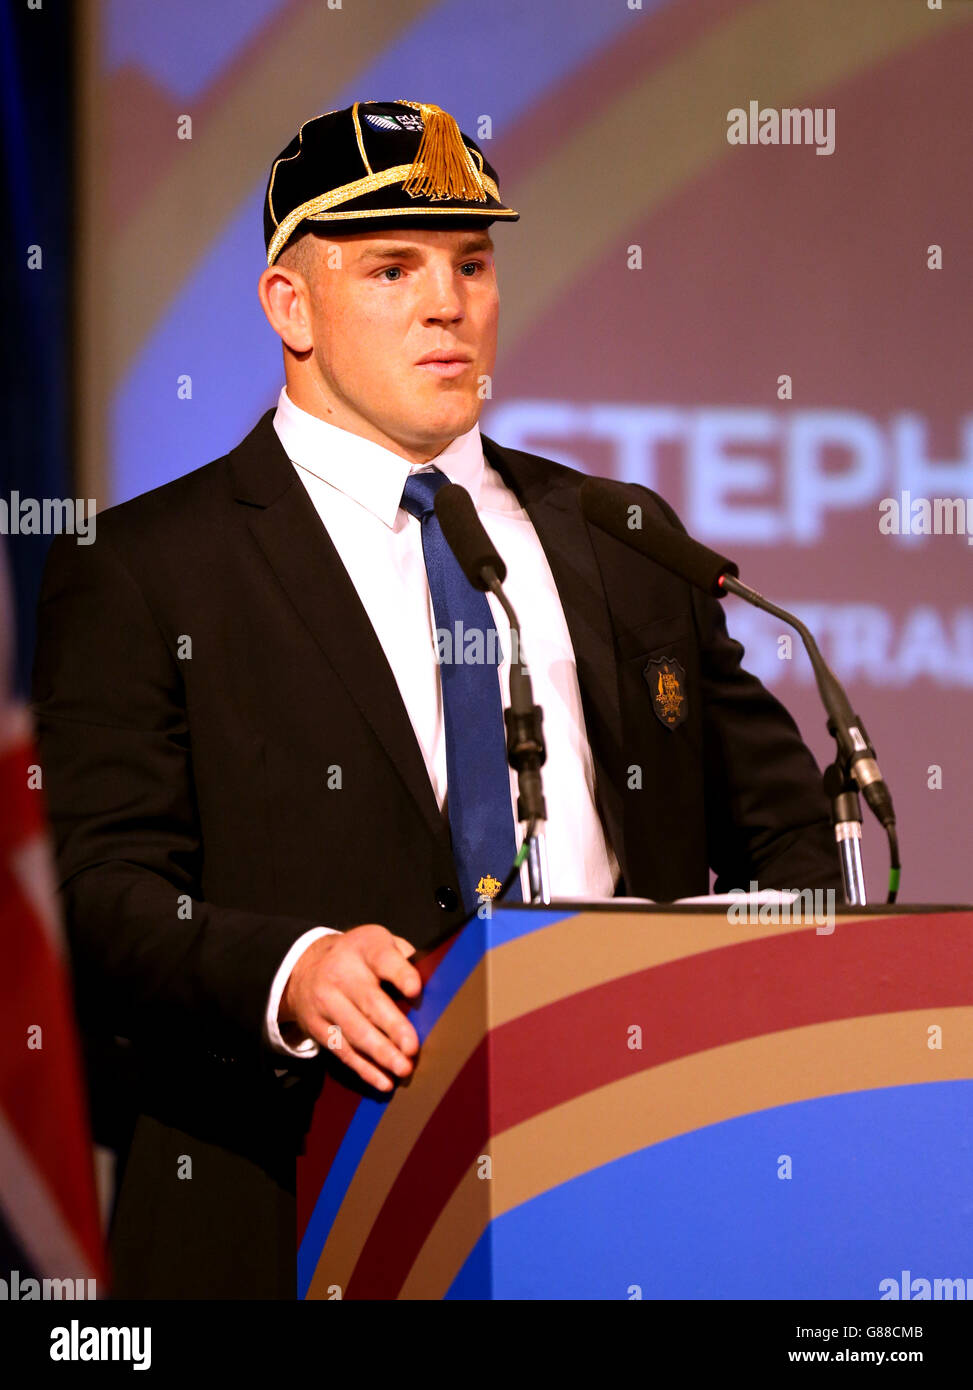 Rugby Union - Australia Welcome Ceremony - The Assembly Rooms. Australia captain Stephen Moore during the welcome ceremony at The Assembly Rooms, Bath. Stock Photo